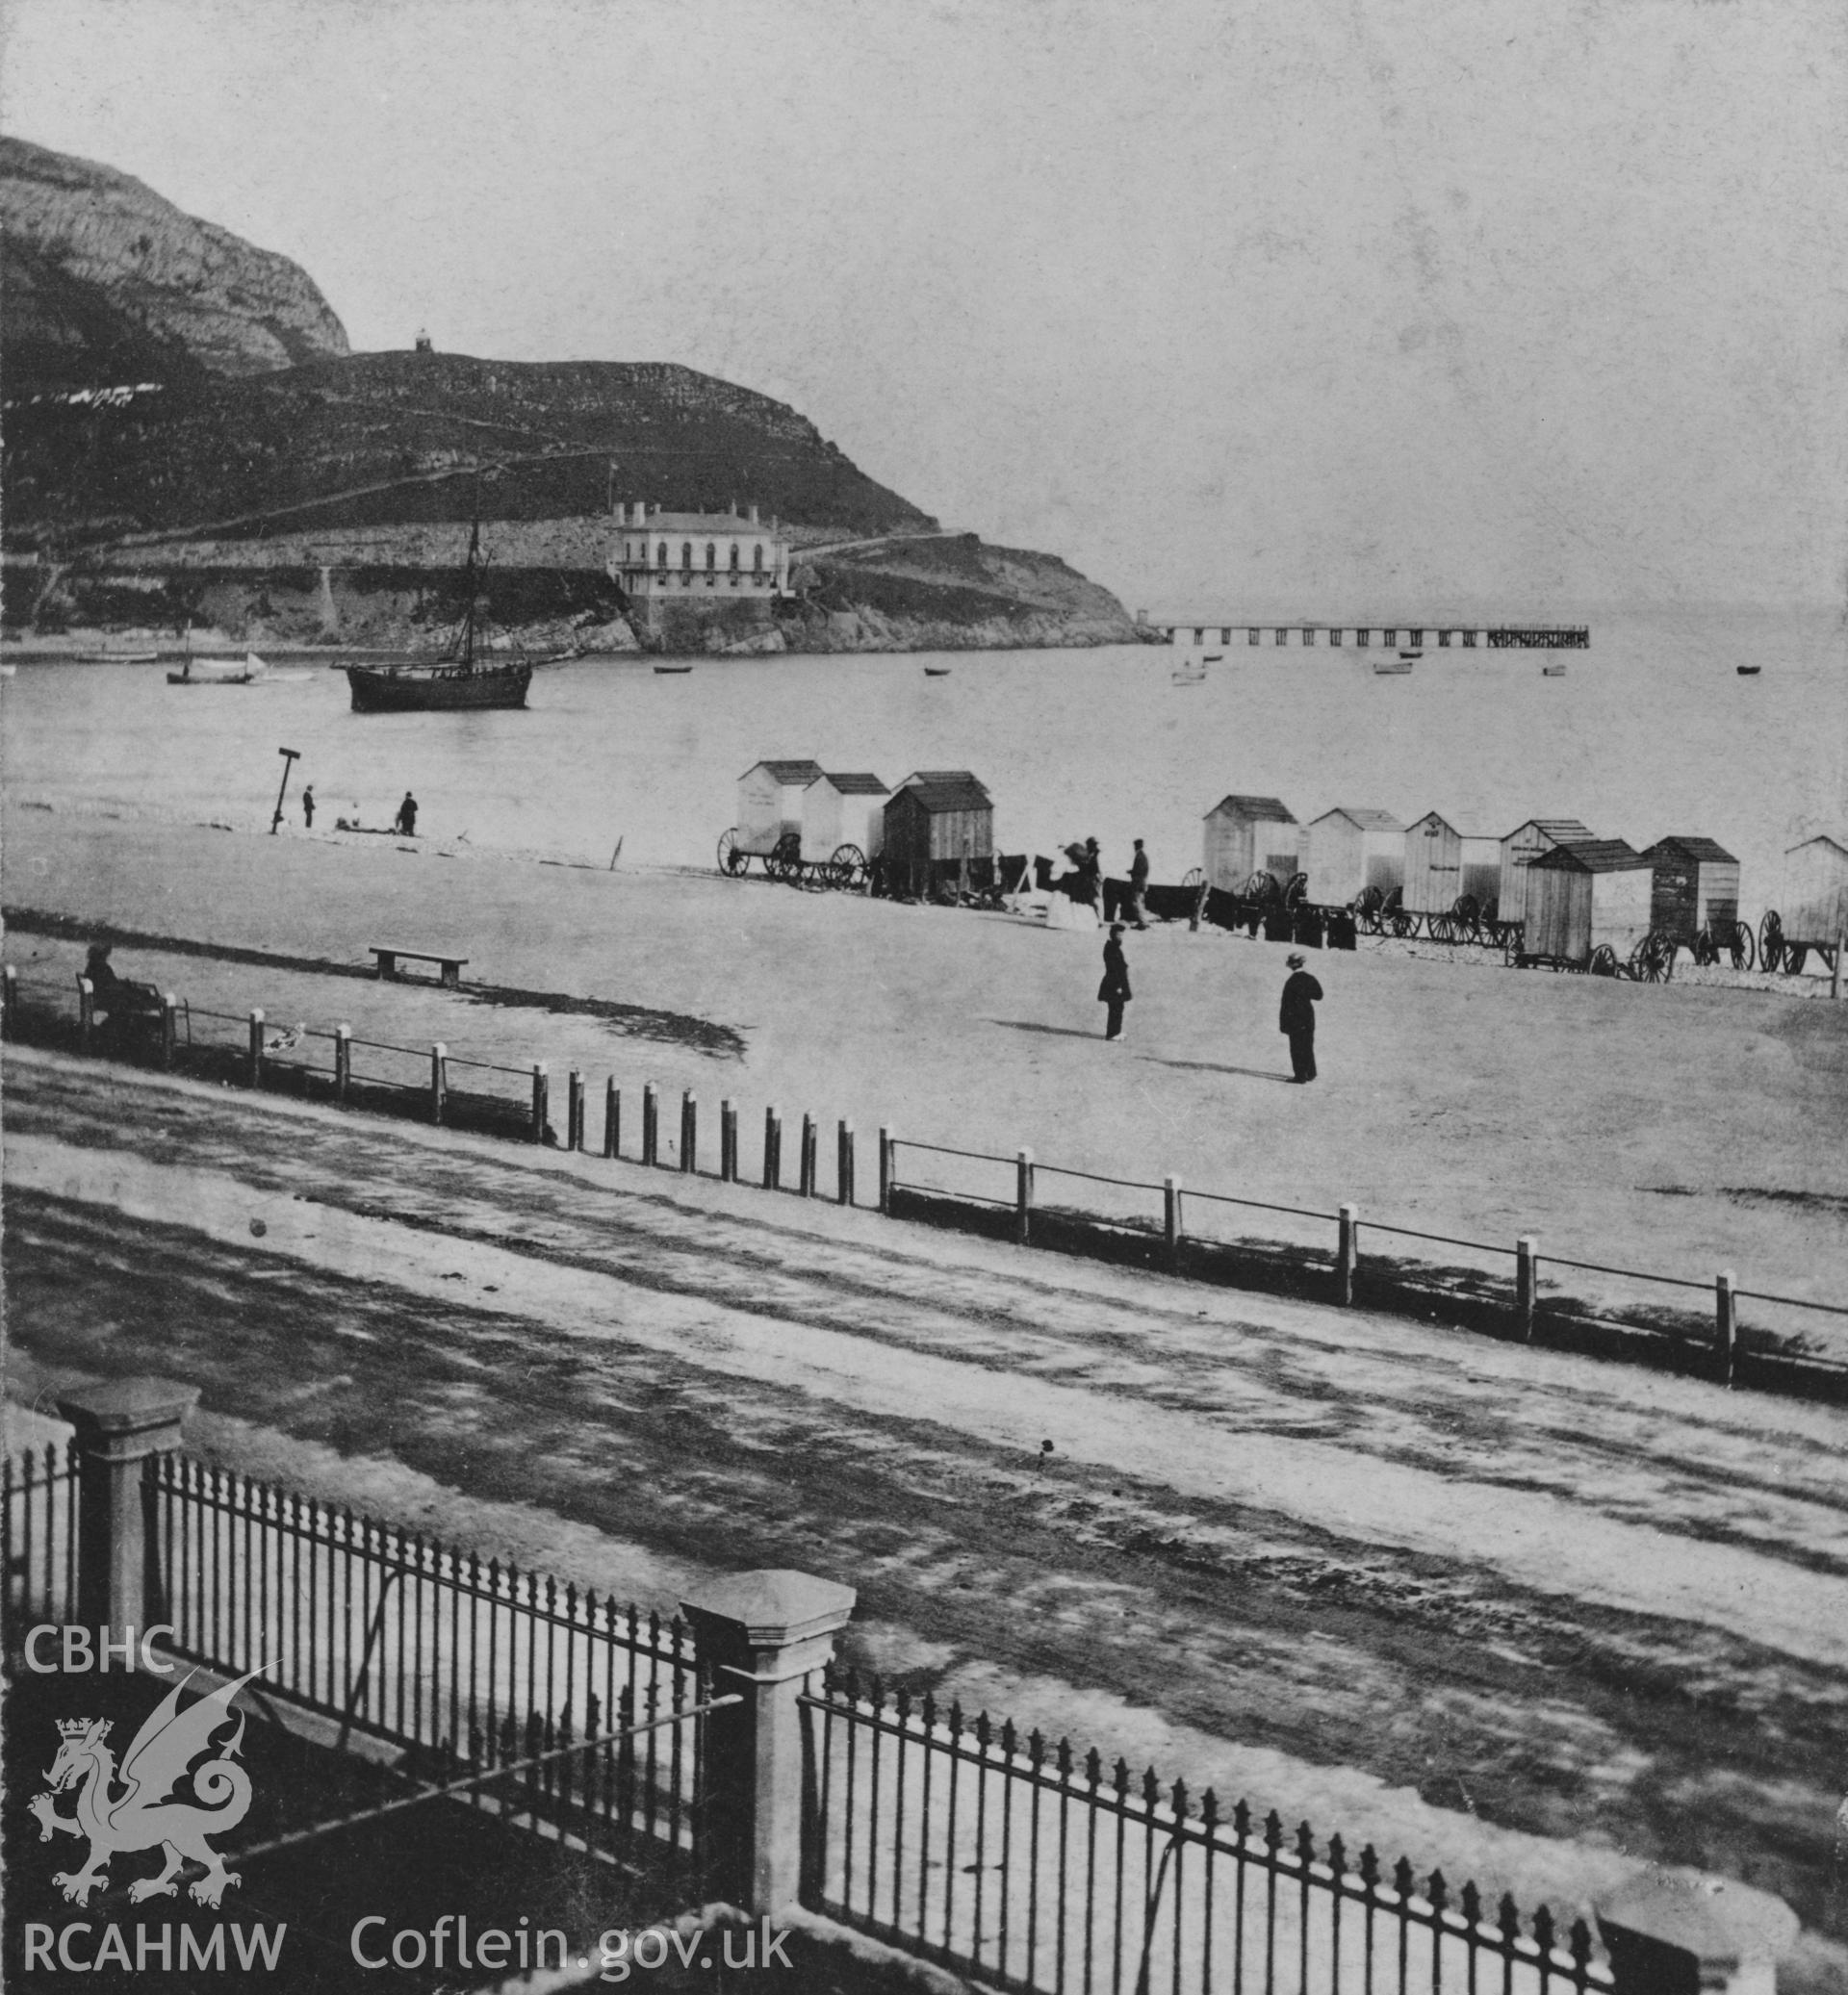 View showing the beach and bathing huts at Llandudno, undated.